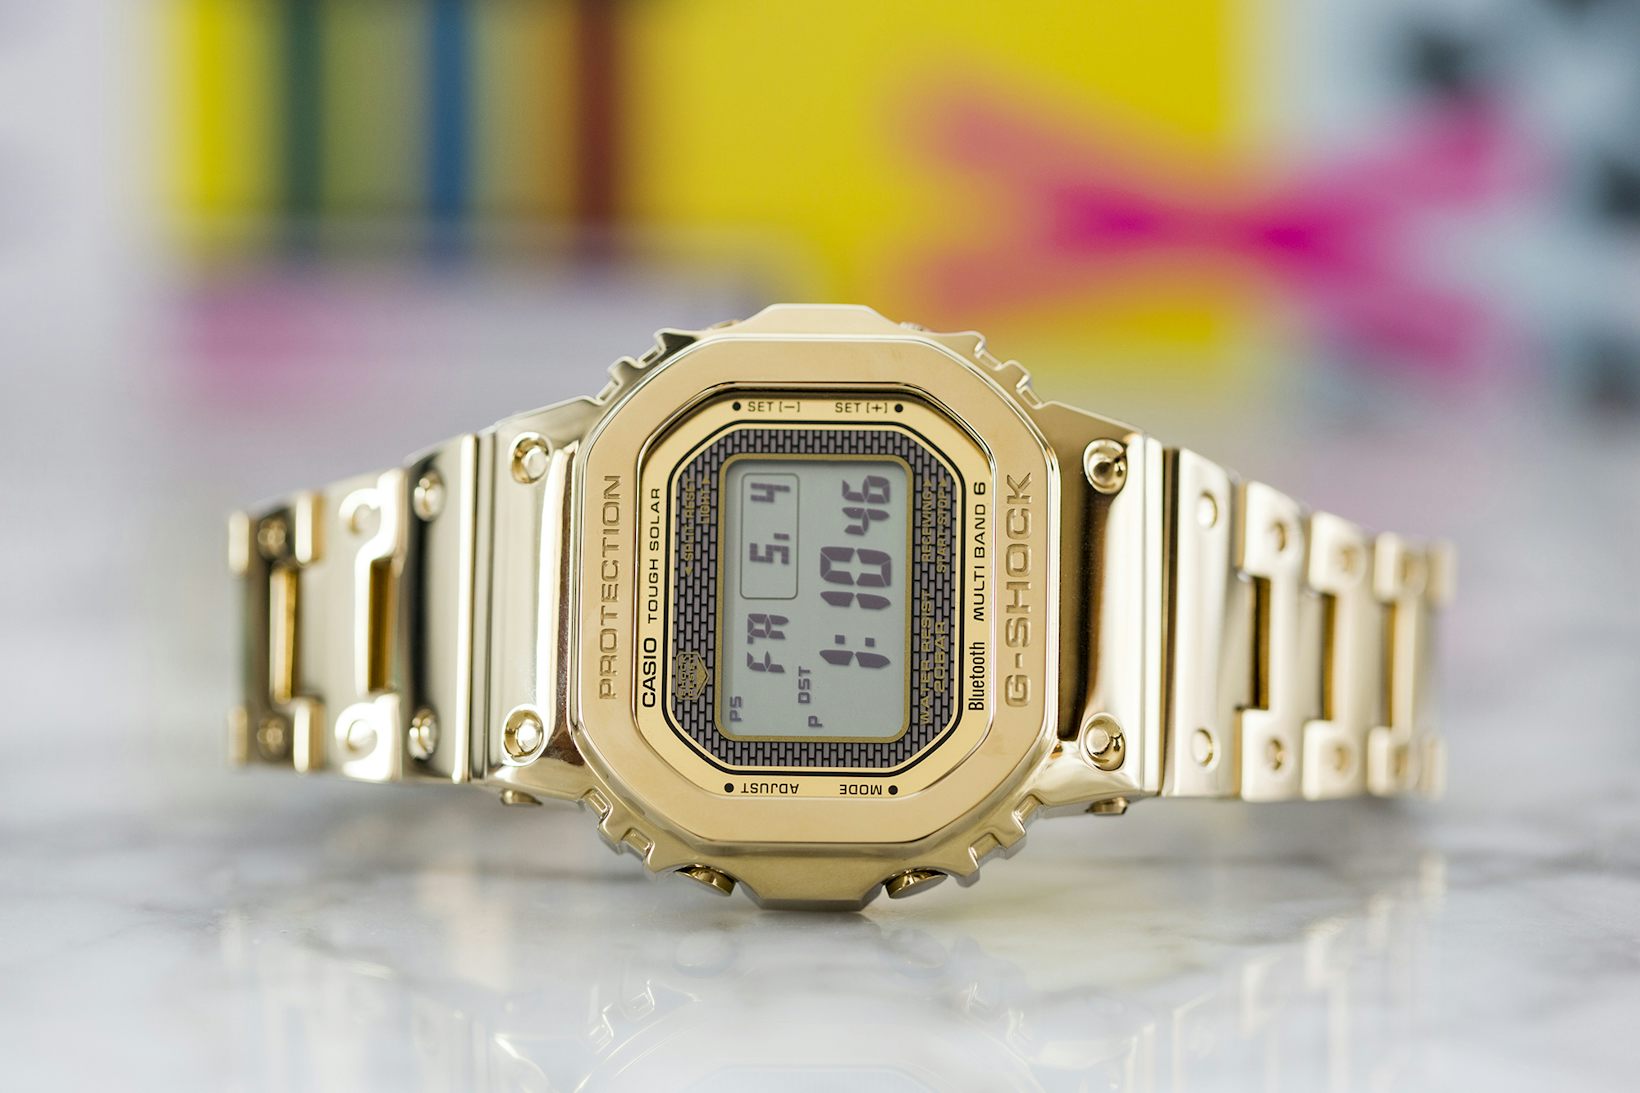 Casio Makes A Watch For Everyone